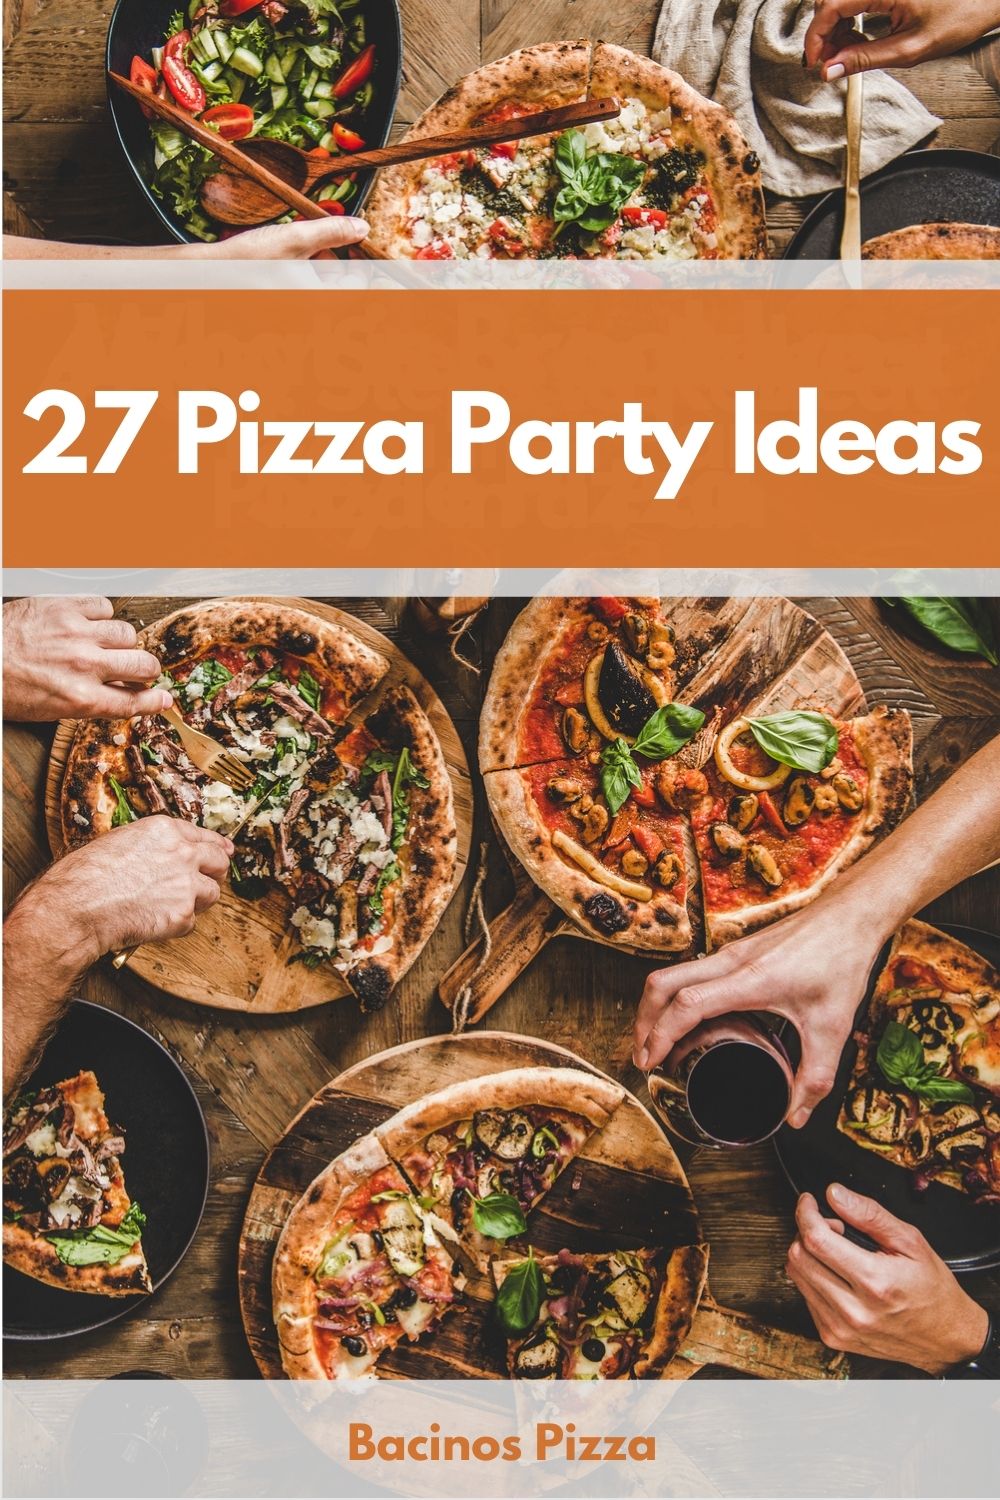 27 Pizza Party Ideas pin